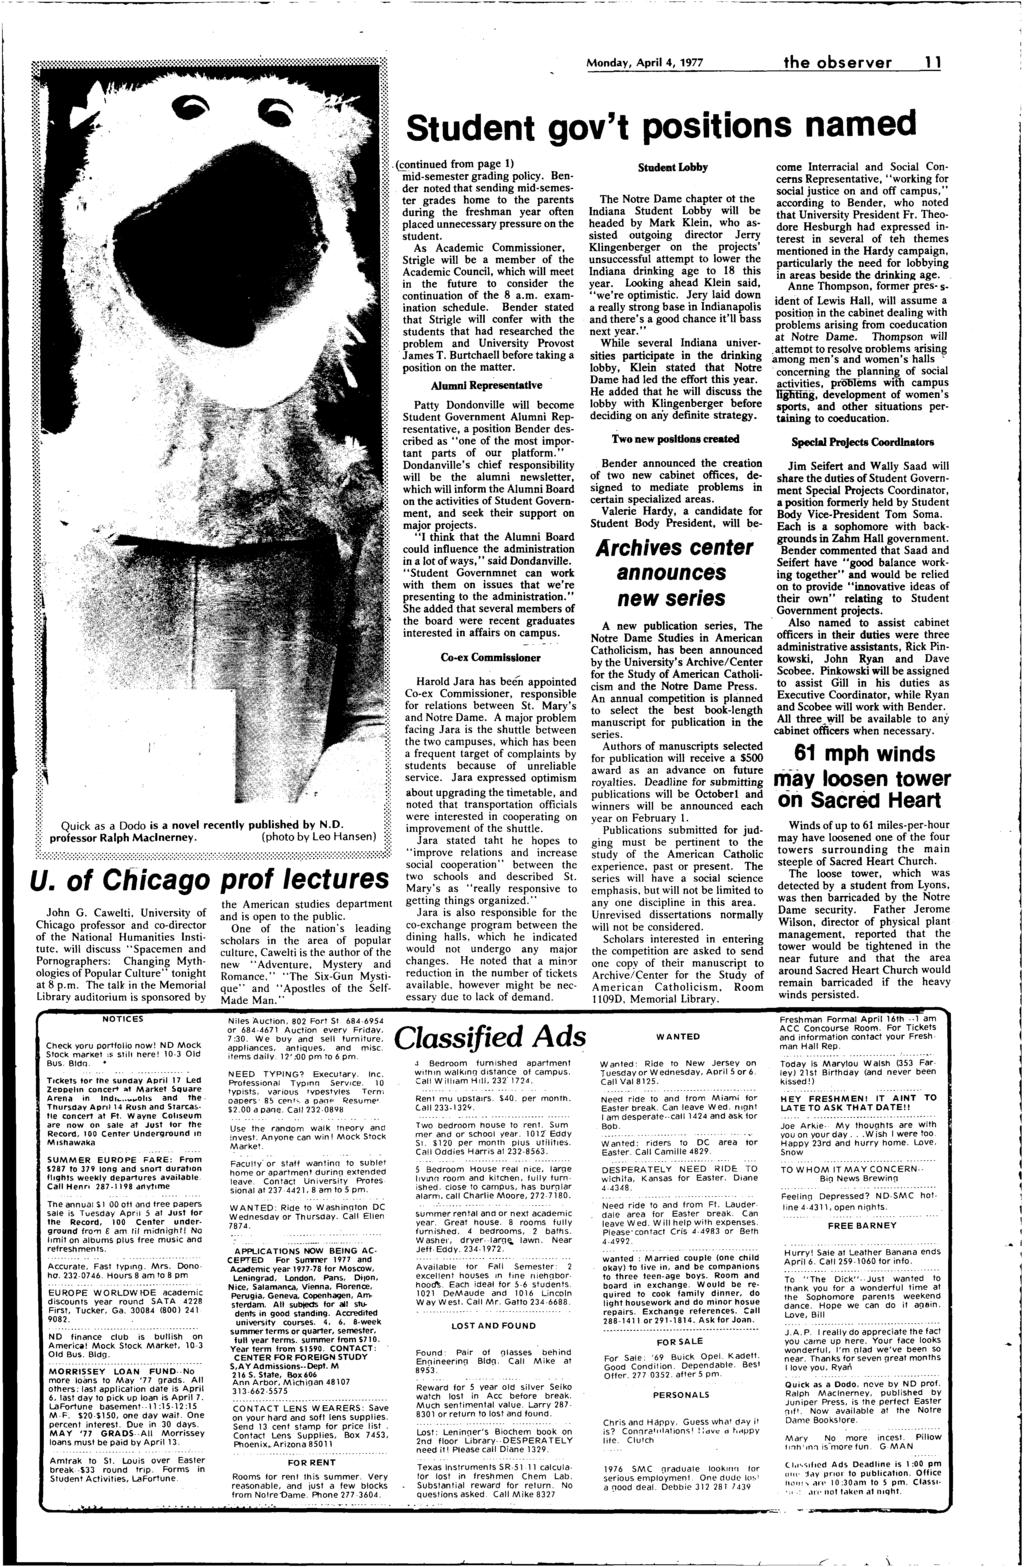 Monday, April 4, 1977 the observer 1 1 Quick as a Dodo is a novel recently published by N.D. professor Ralph Maclnerney. (photo by Leo Hansen) U. of Chicago prof lectures John G. Cawelti.